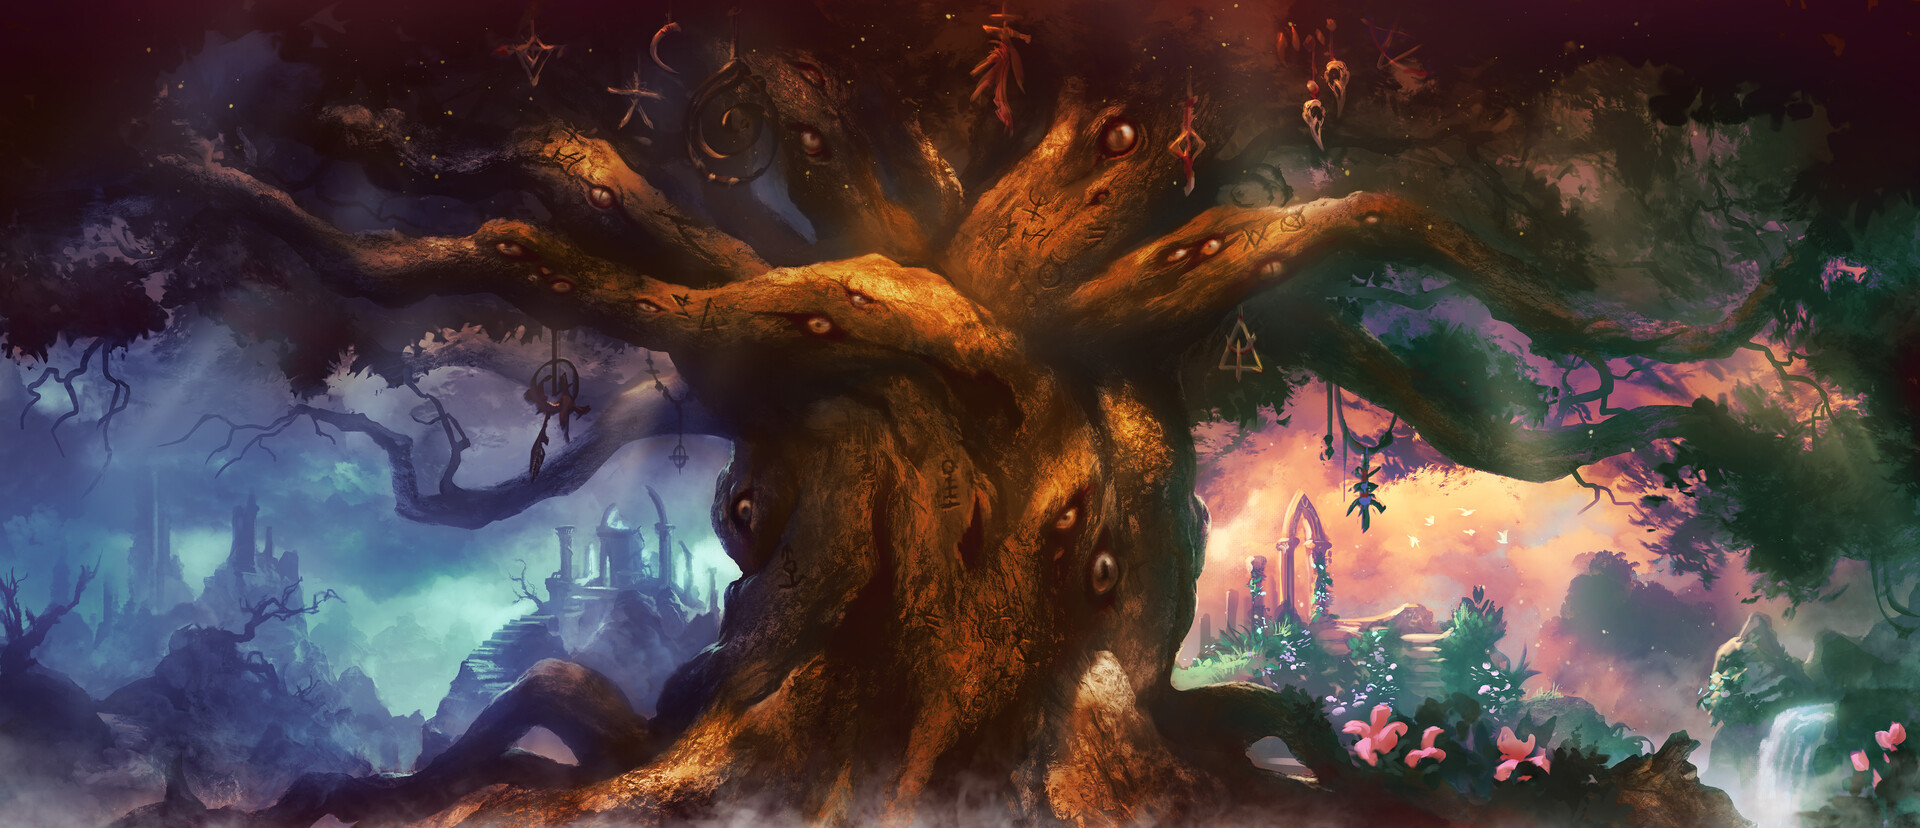 A tree with many eyes on it set against a fantasy landscape background